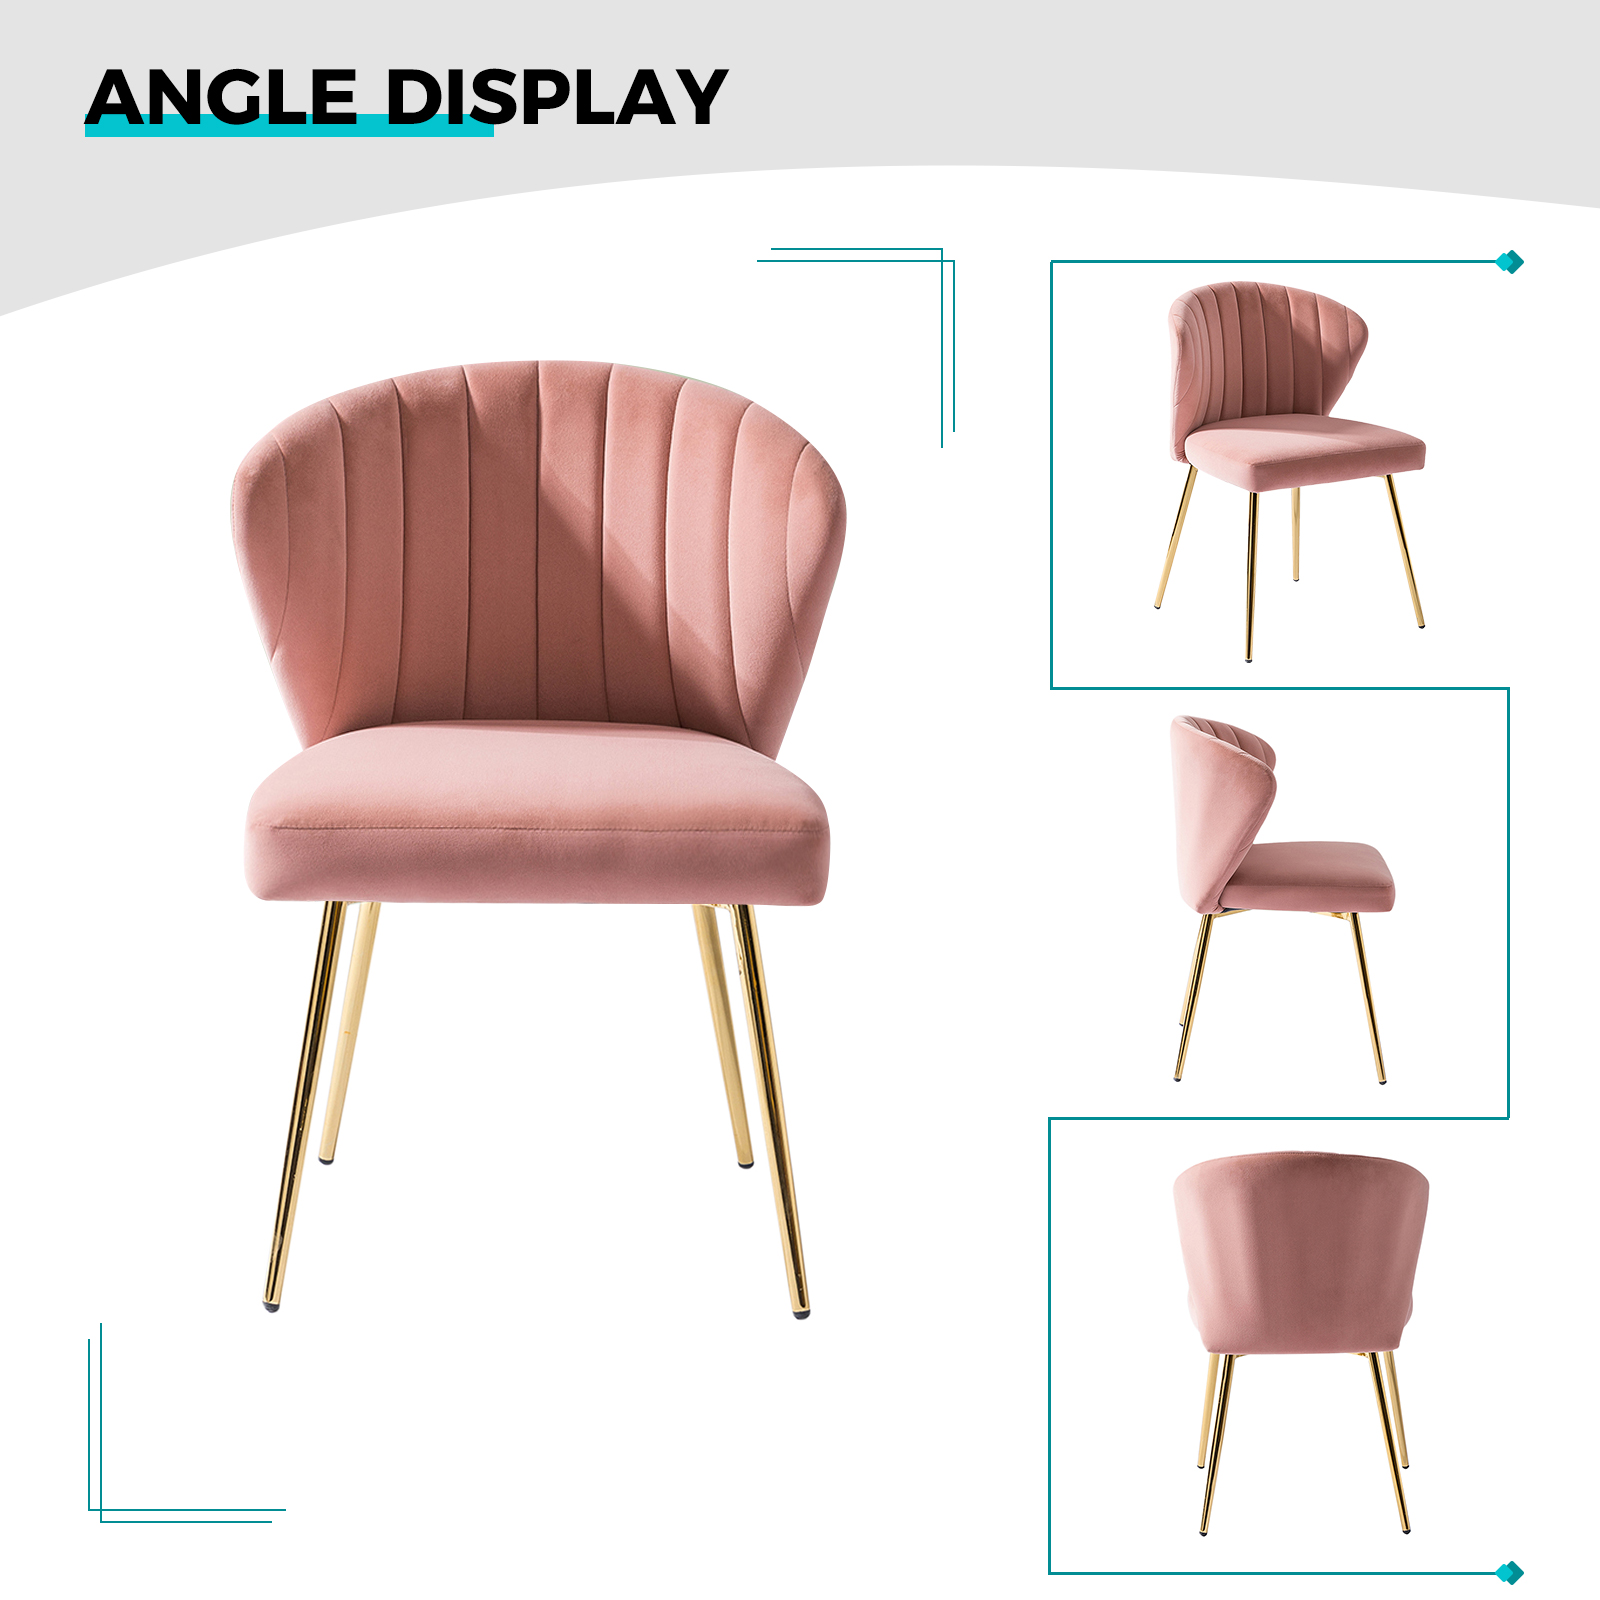 Velvet Wingback Accent Chair Upholstered Home Kitchen Dining Chair Tufted Gold Metal Legs Living Bedroom Pink - image 3 of 10